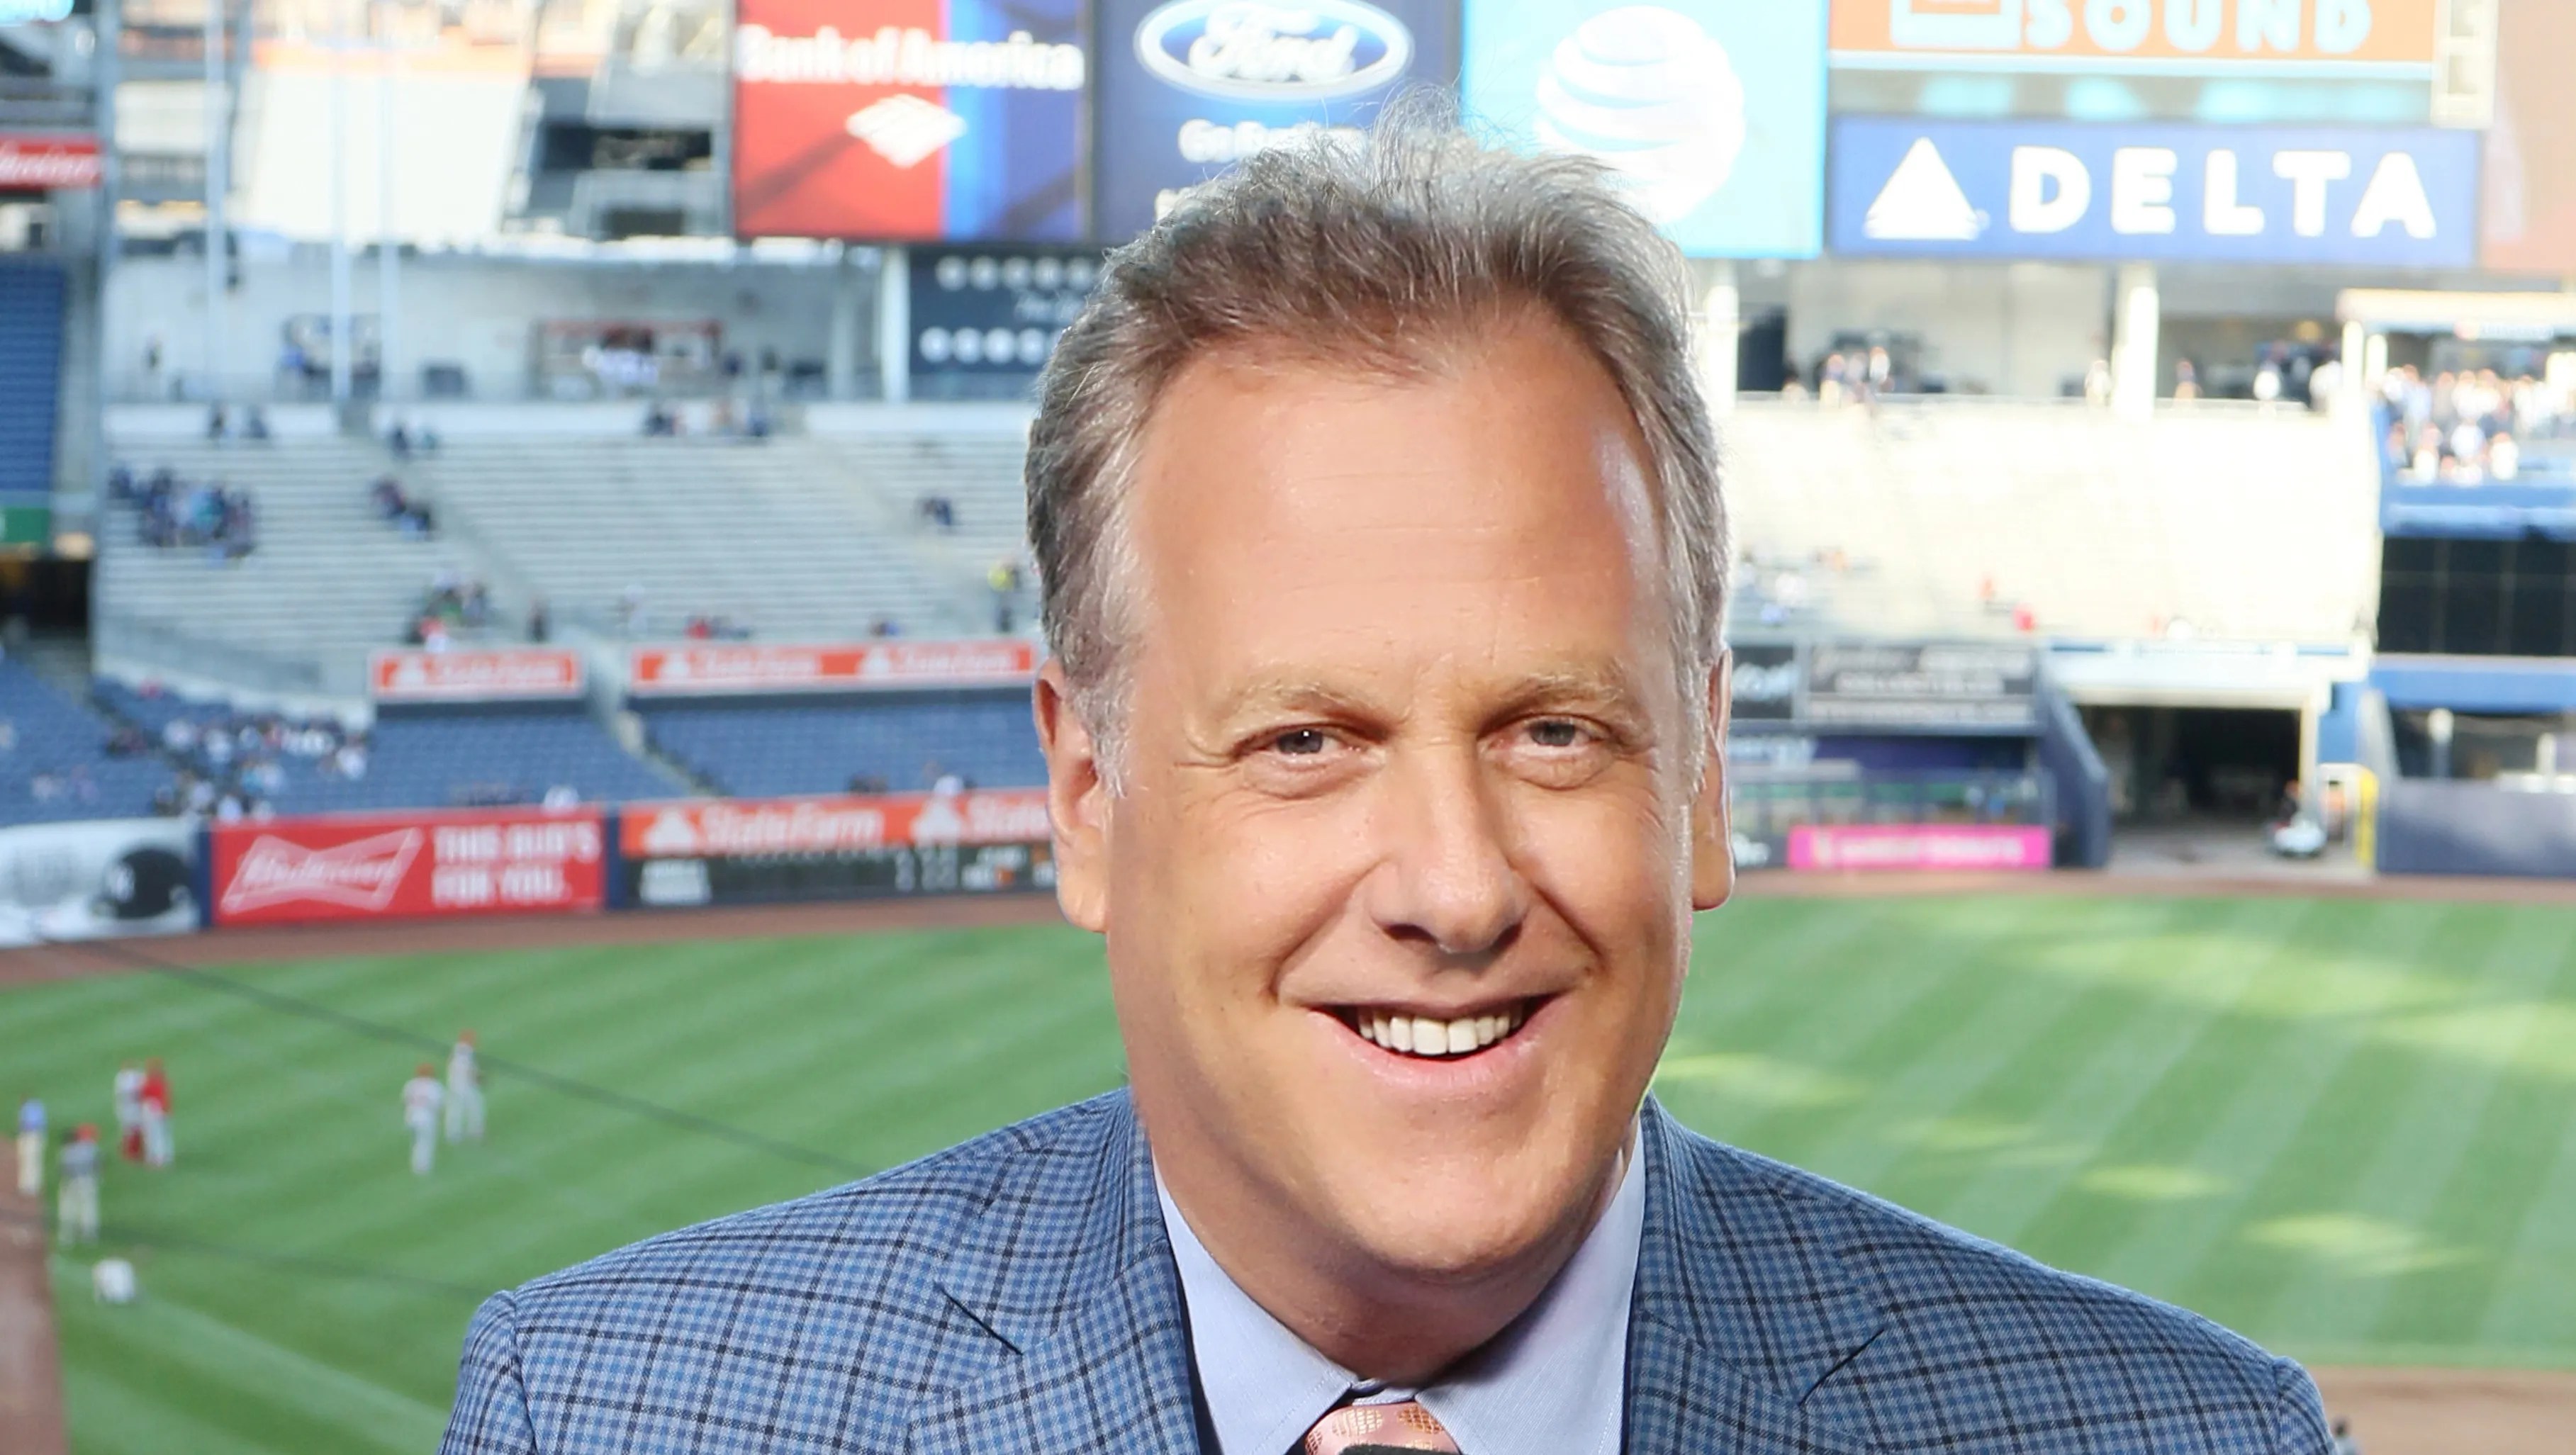 Michael Kay returns to New York Yankees TV booth after monthlong absence